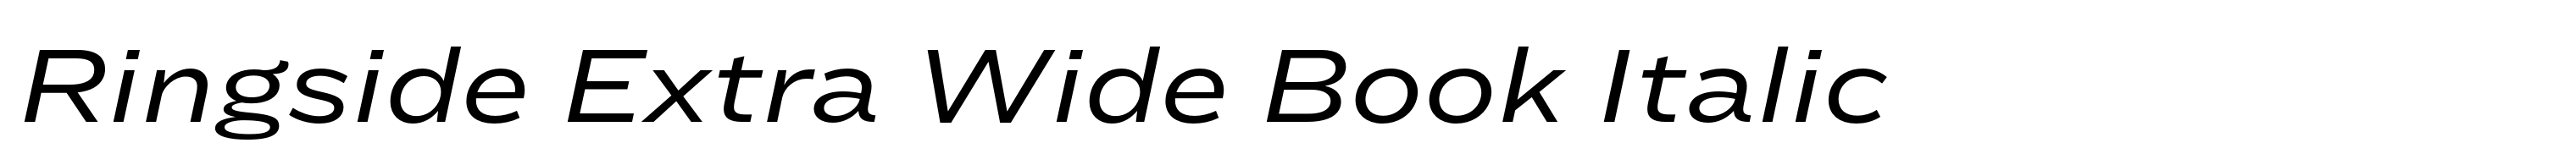 Ringside Extra Wide Book Italic